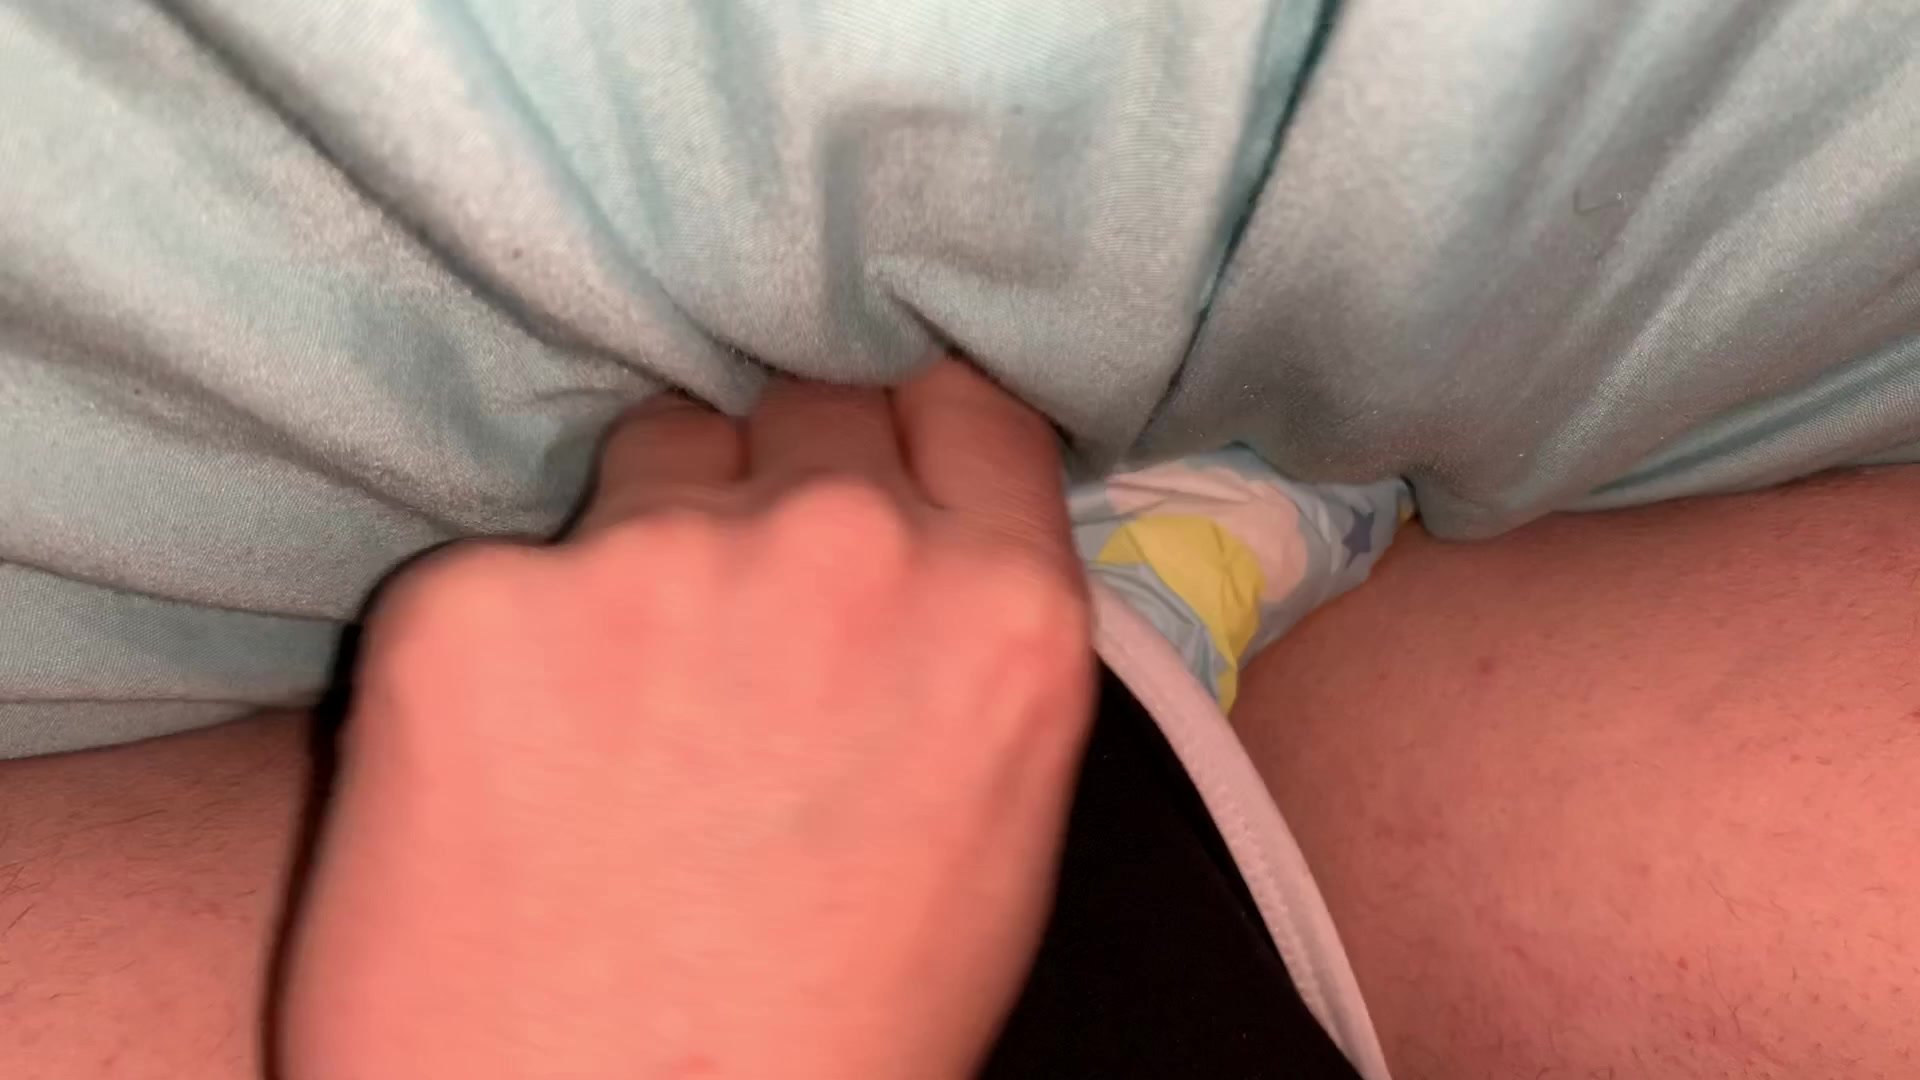 Squishing my soggy and messy diaper